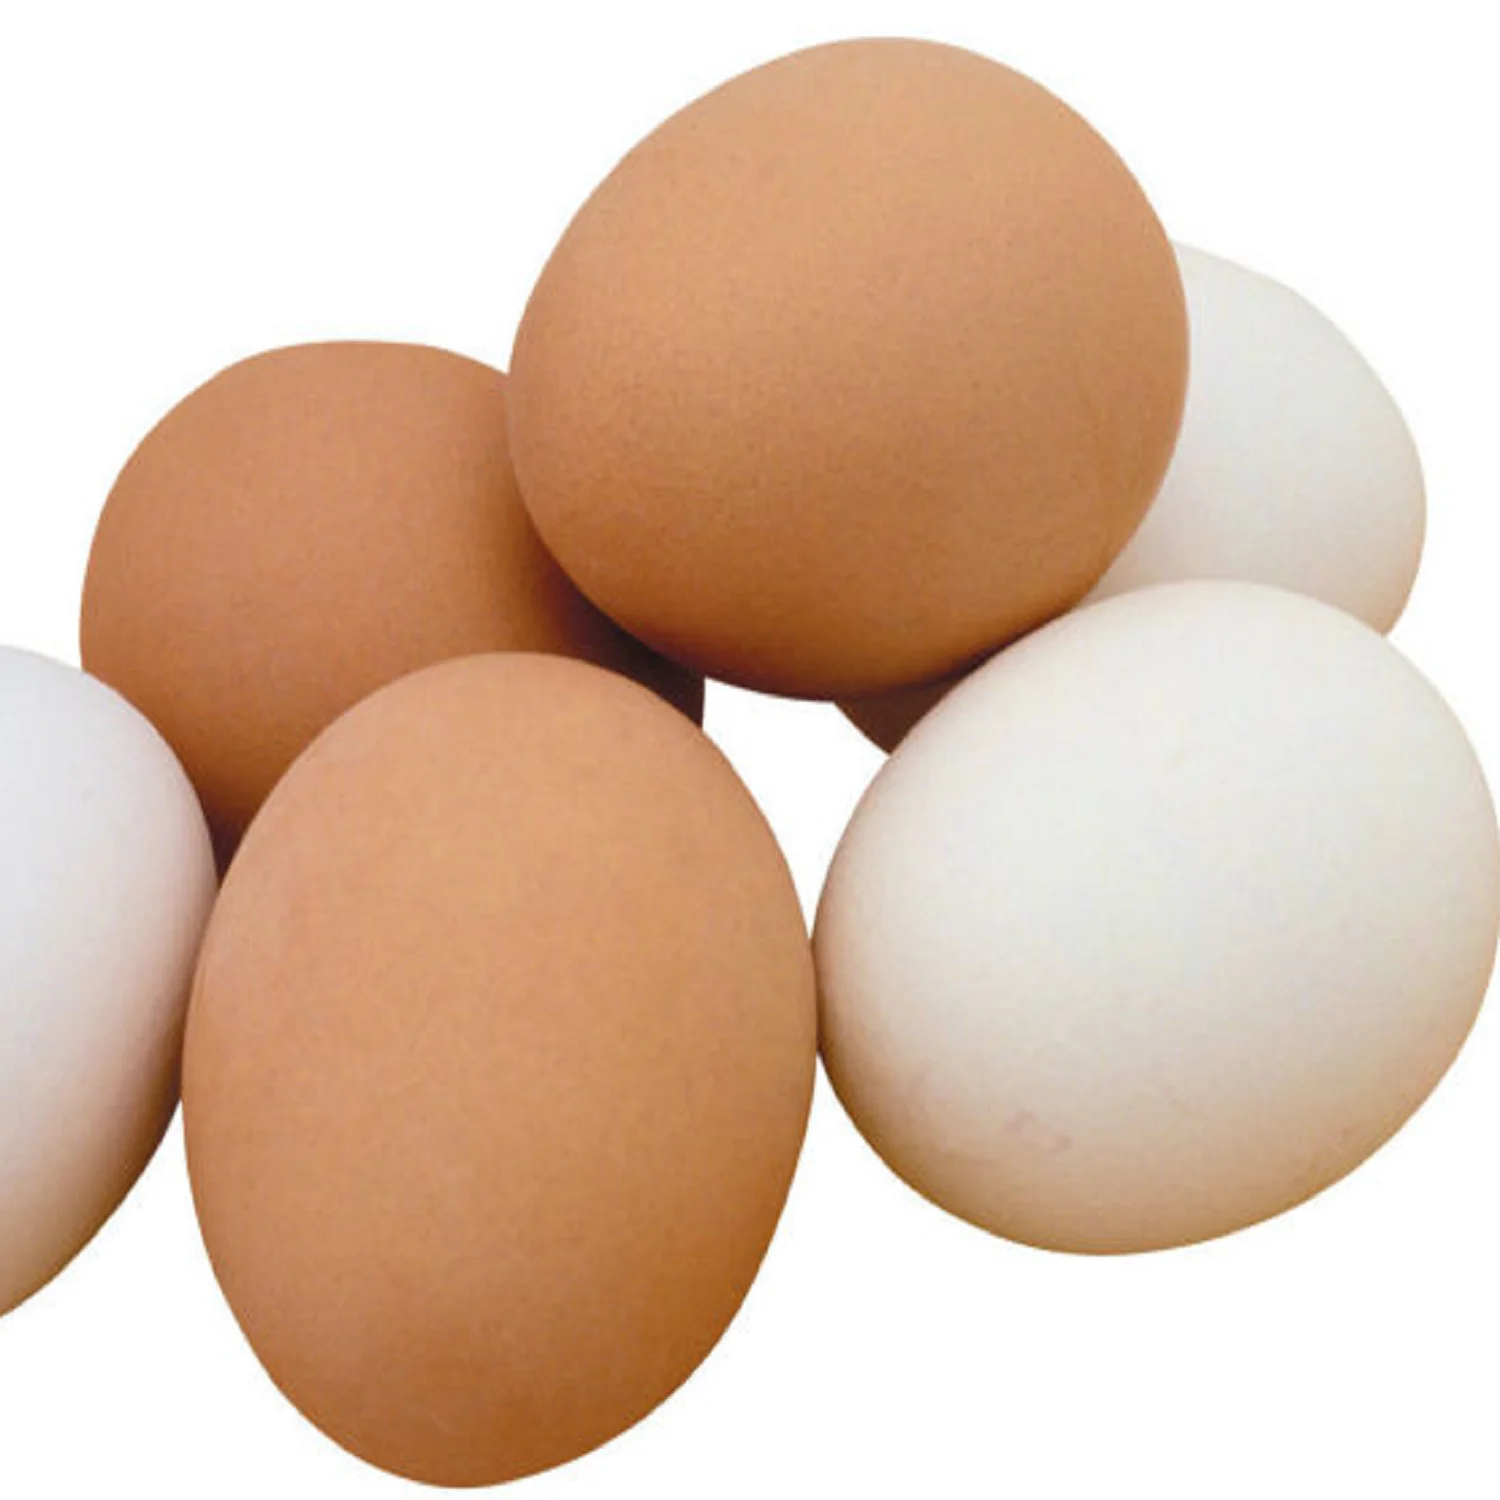 100% Farm Fresh Healthy Food Consumption Brown Shell Table Eggs for Genuine Wholesale Purchasers